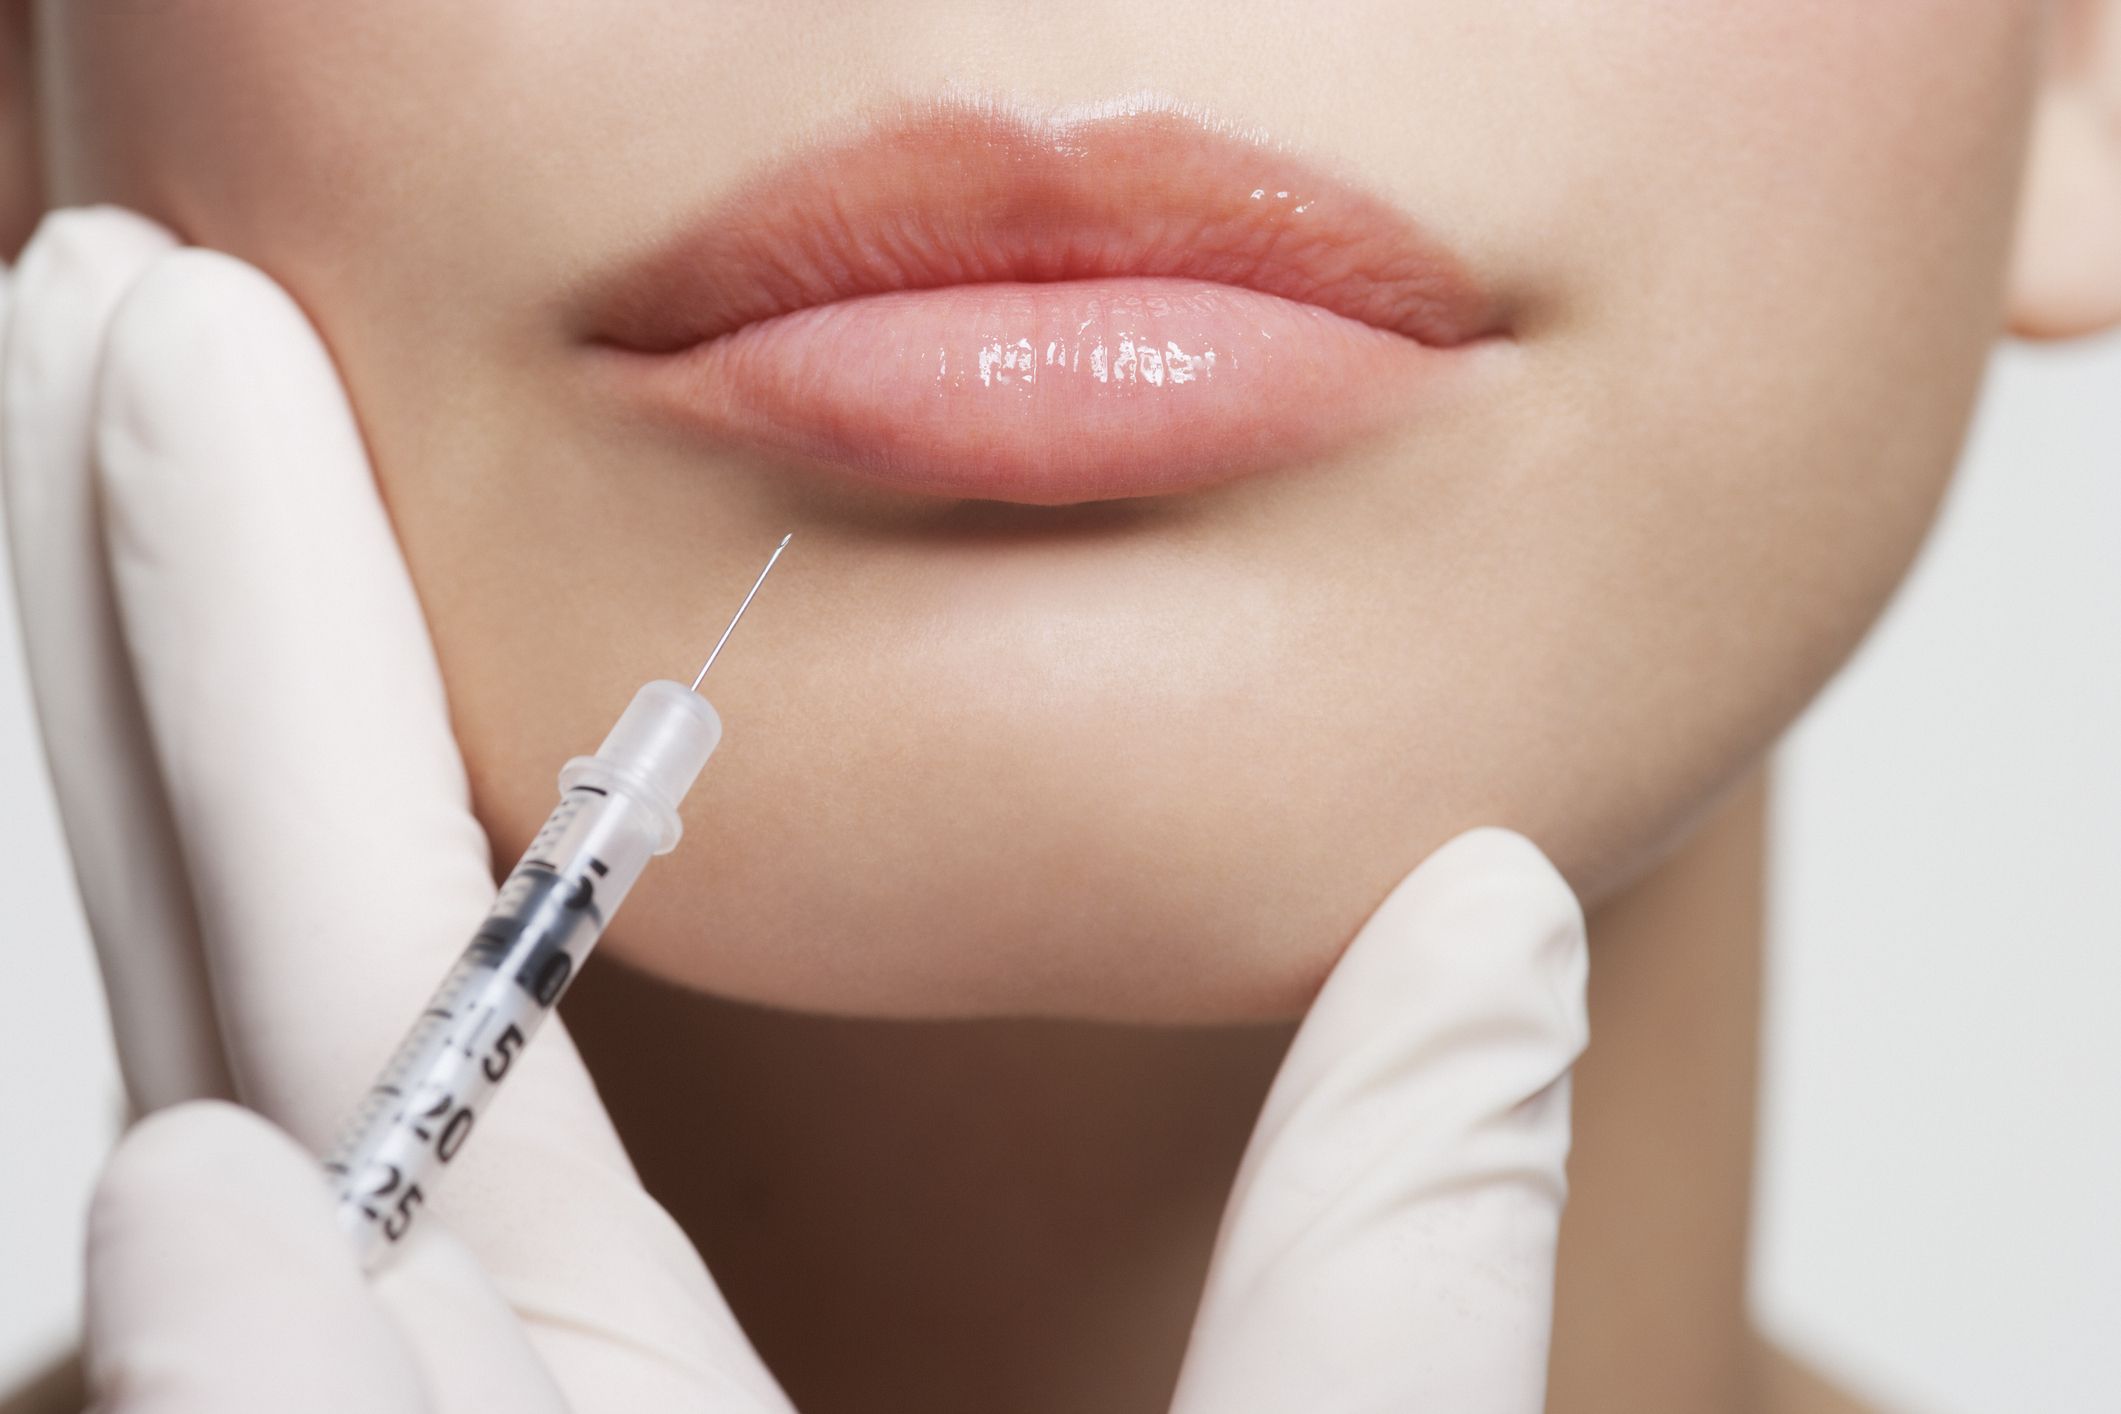 Best Injectables - Cost & What to Expect for Lip Injections, Face Fillers  and Botox